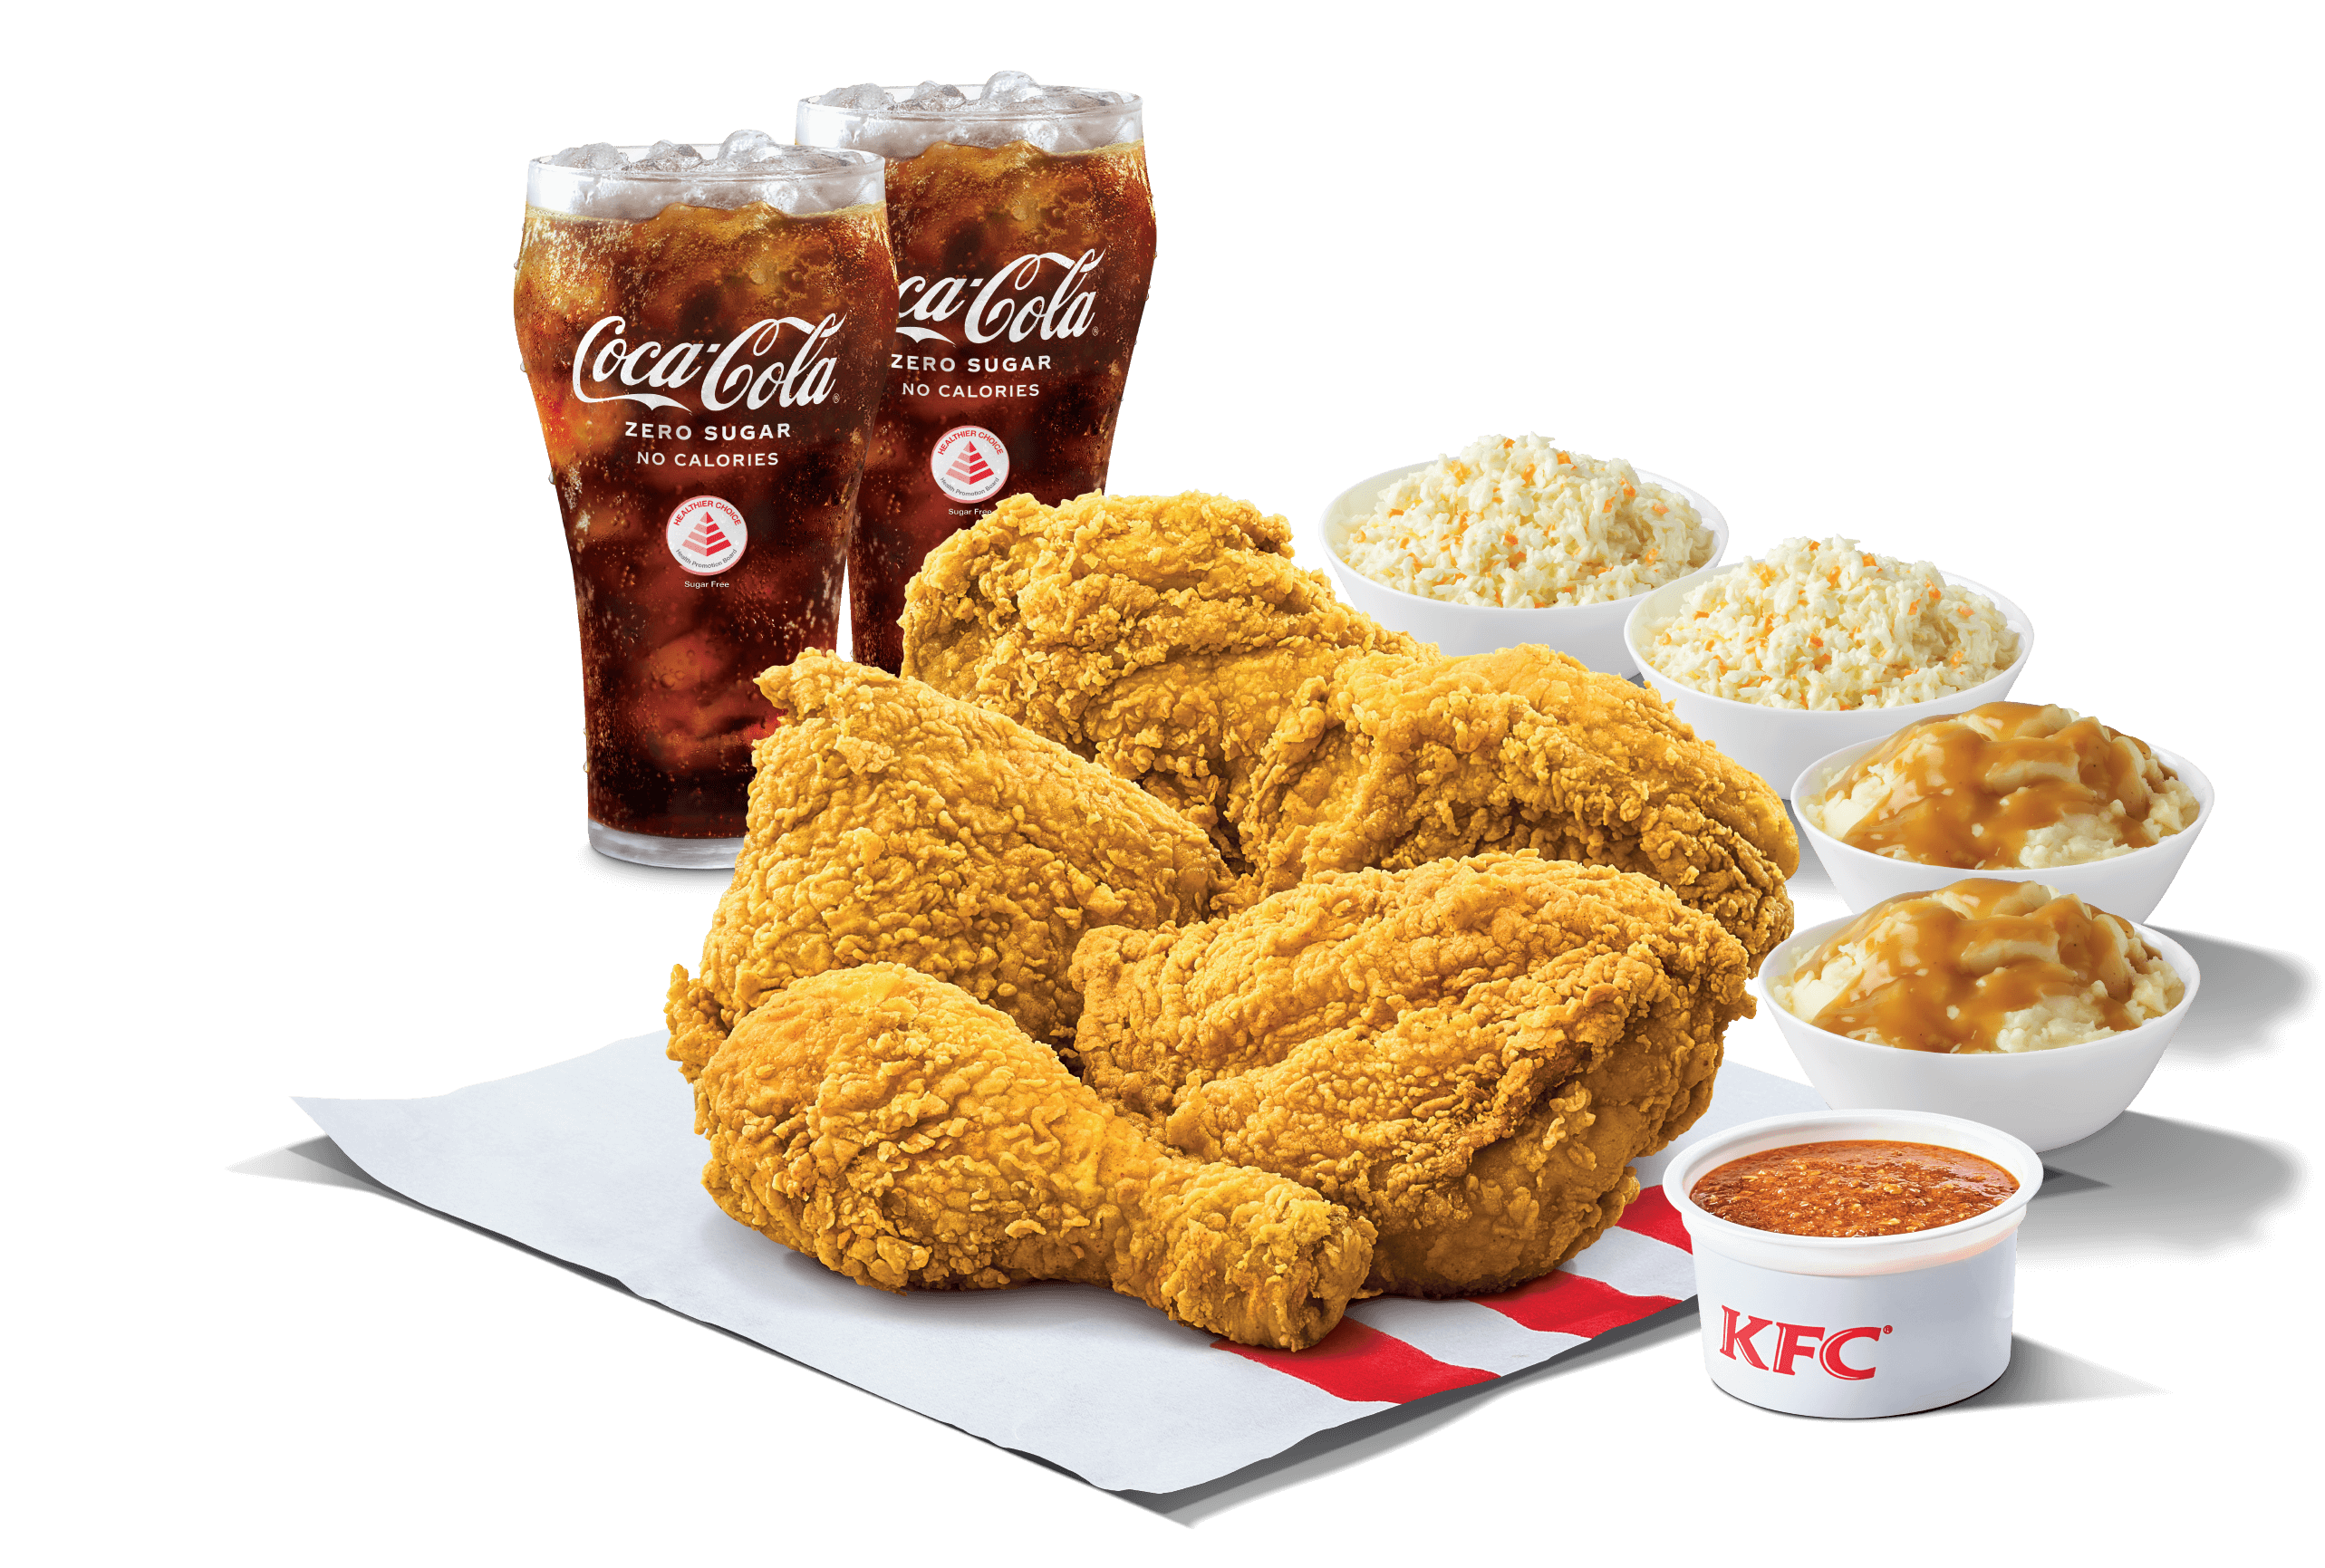 KFC's chicken and sauce next to two glass of Coca-Cola